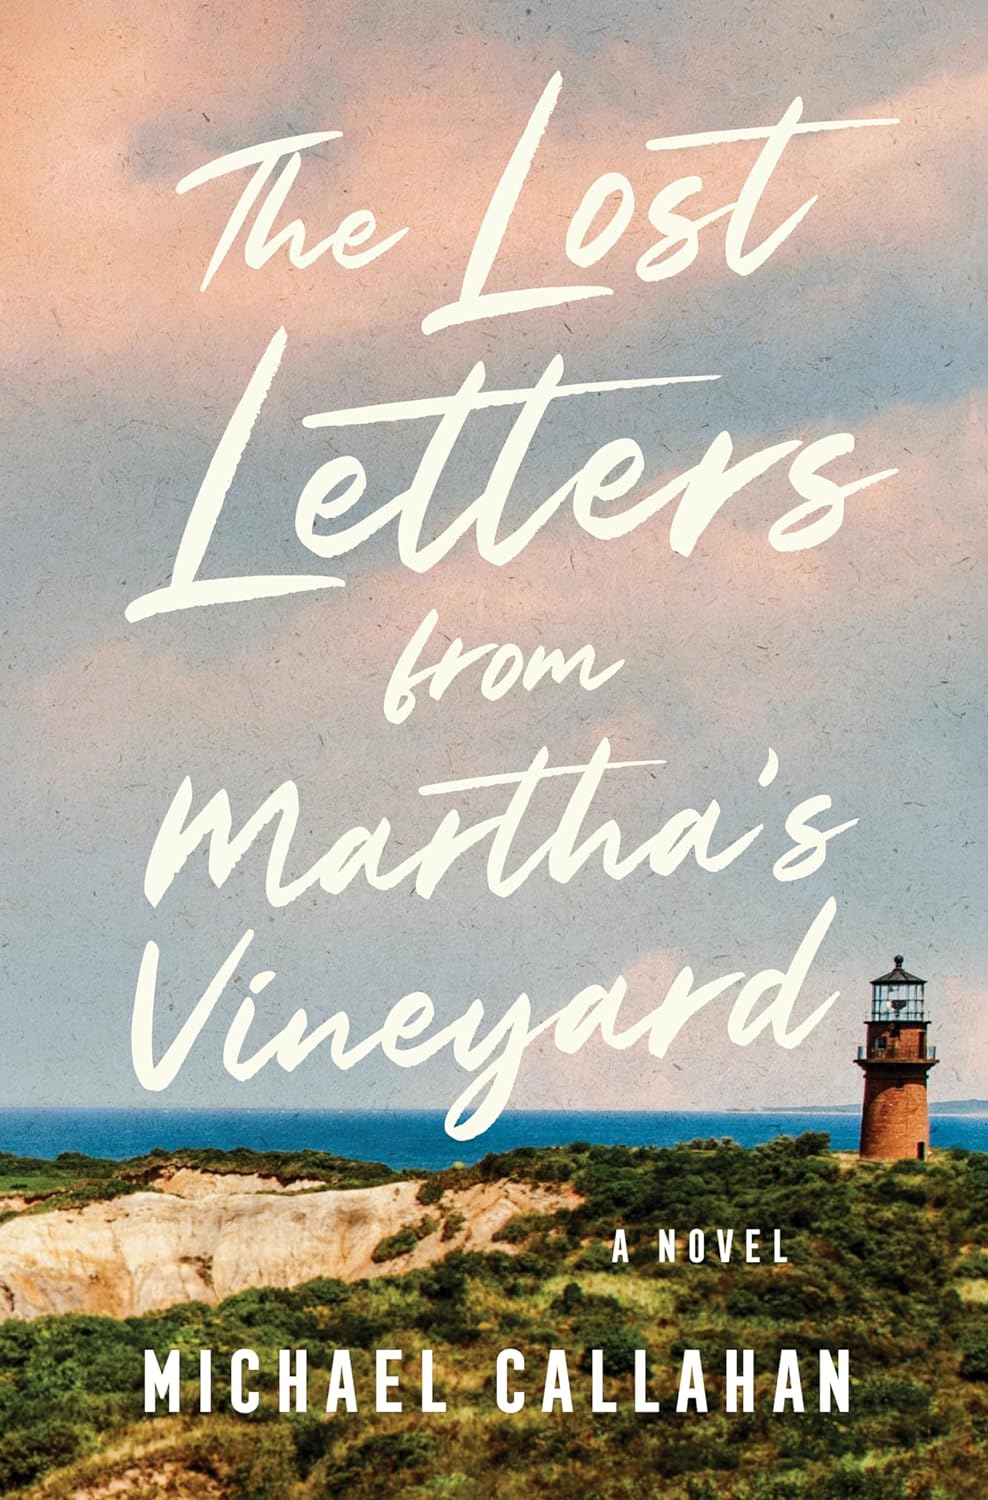 Image for "The Lost Letters from Marthas Vineyard"